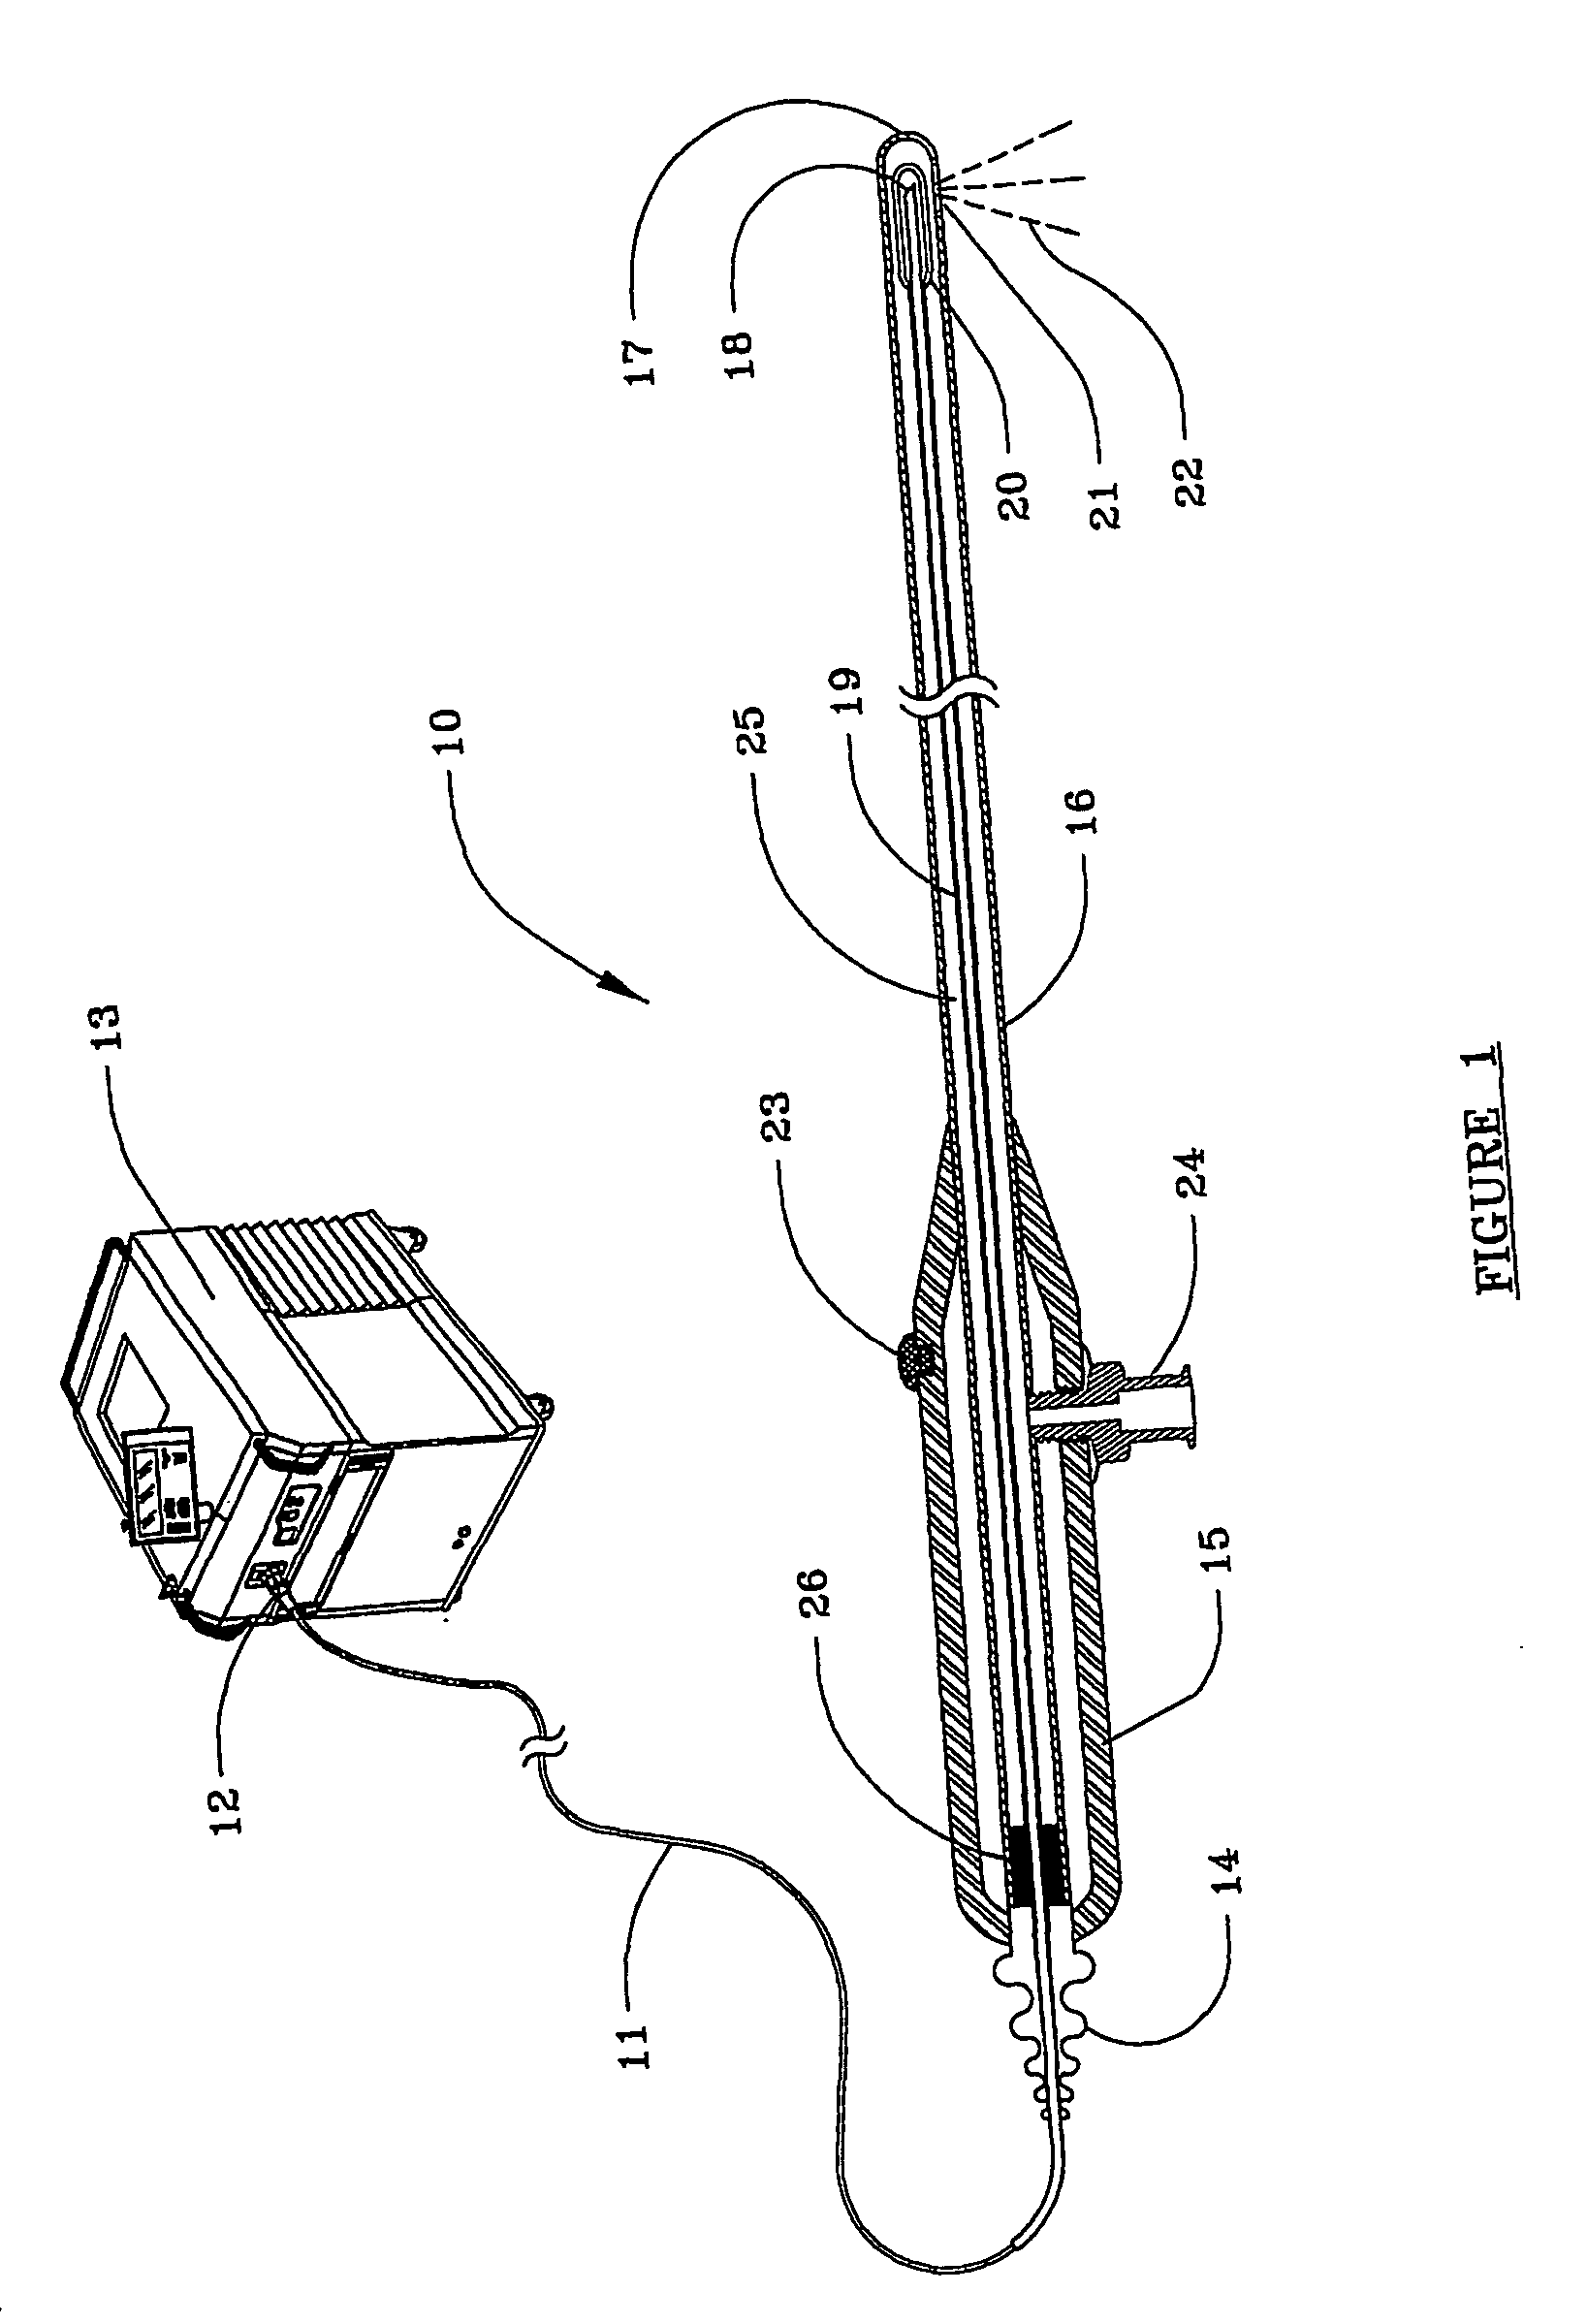 Devices and methods for minimally invasive treatment of degenerated spinal discs